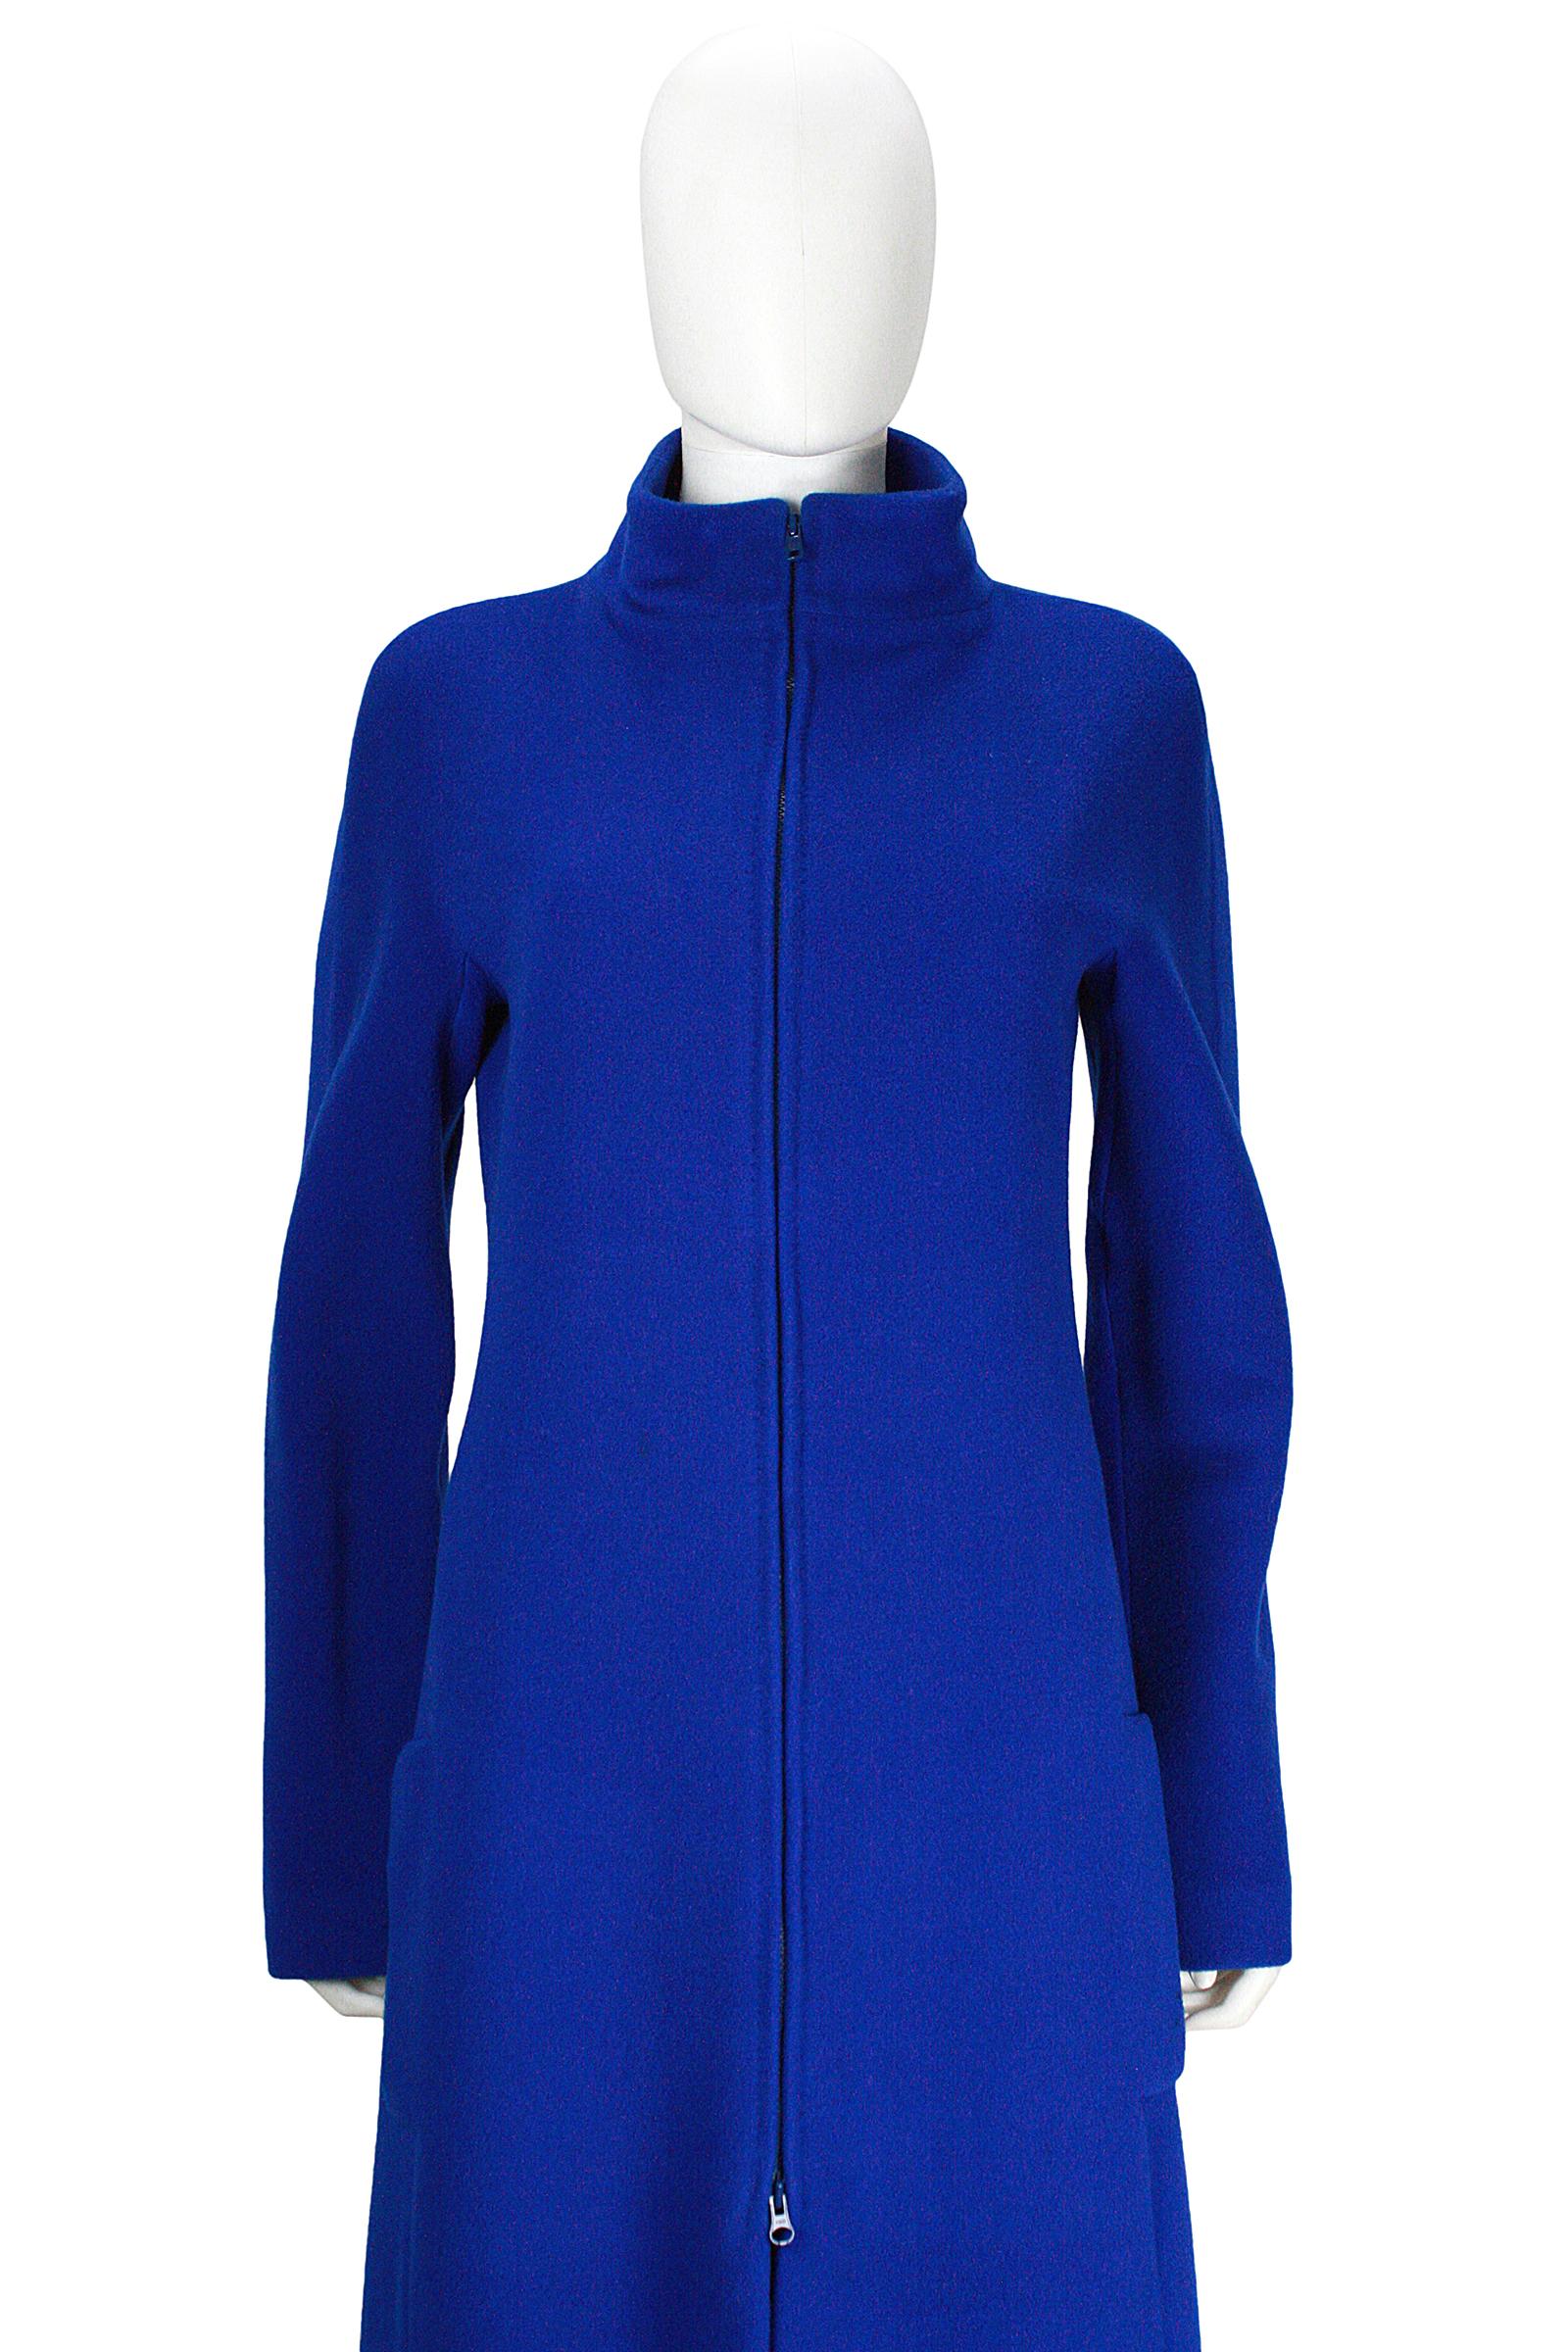 1980s Krizia Blue Wool Double Zip Coat In Good Condition For Sale In Los Angeles, CA